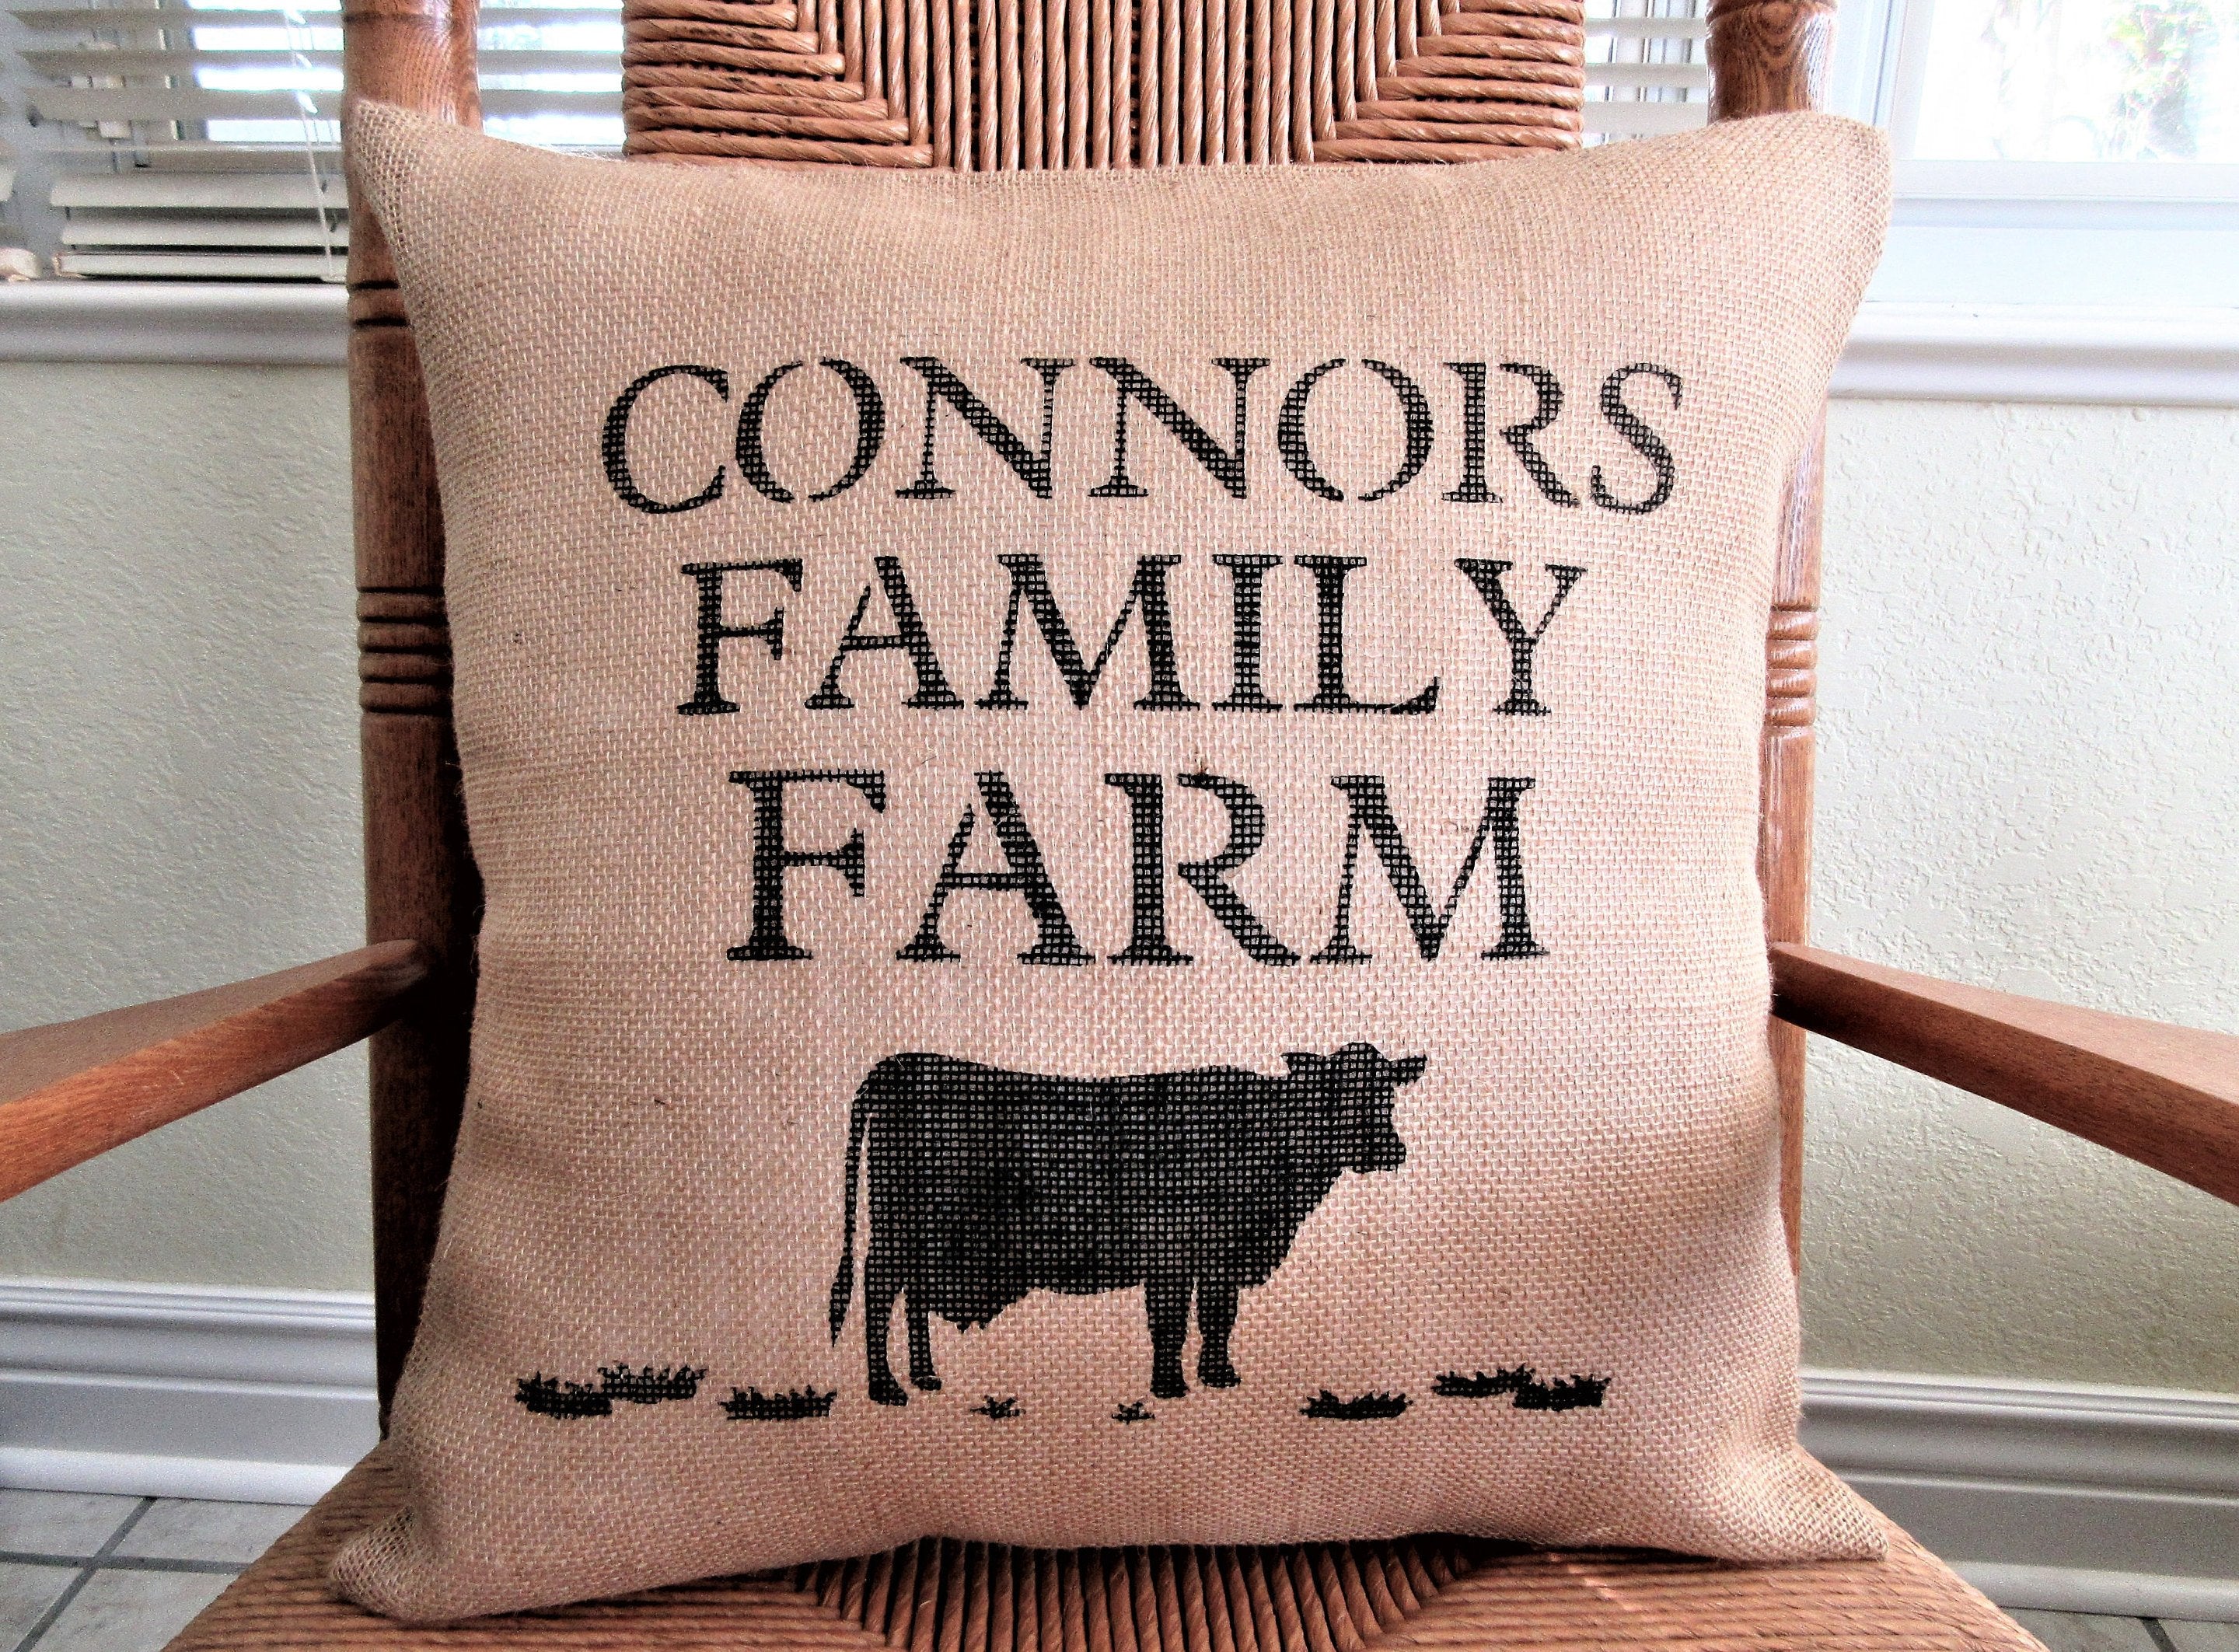 Personalized Farm Dairy Cow Burlap Pillow cover